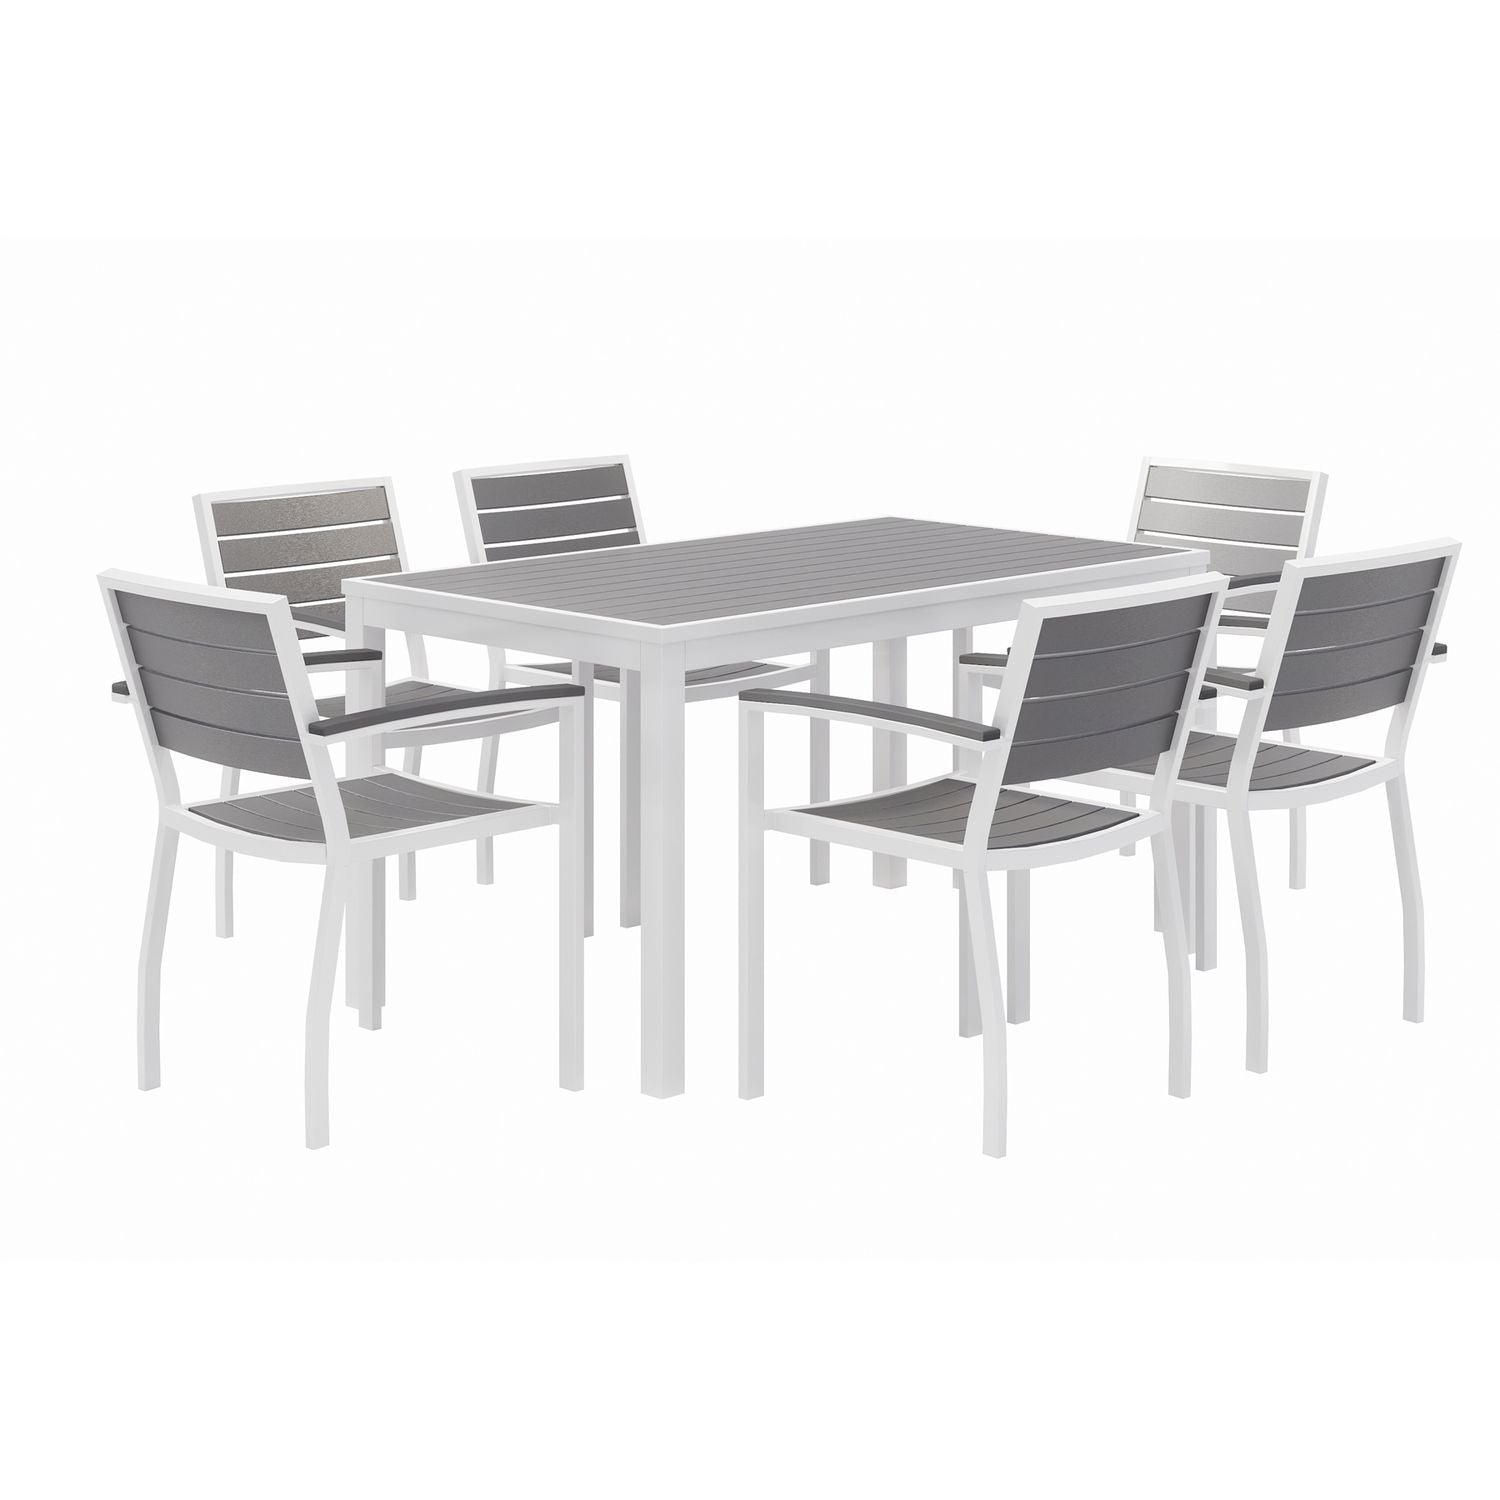 eveleen-outdoor-patio-table-with-six-gray-powder-coated-polymer-chairs-32-x-55-x-29-gray-ships-in-4-6-business-days_kfi840031918536 - 1